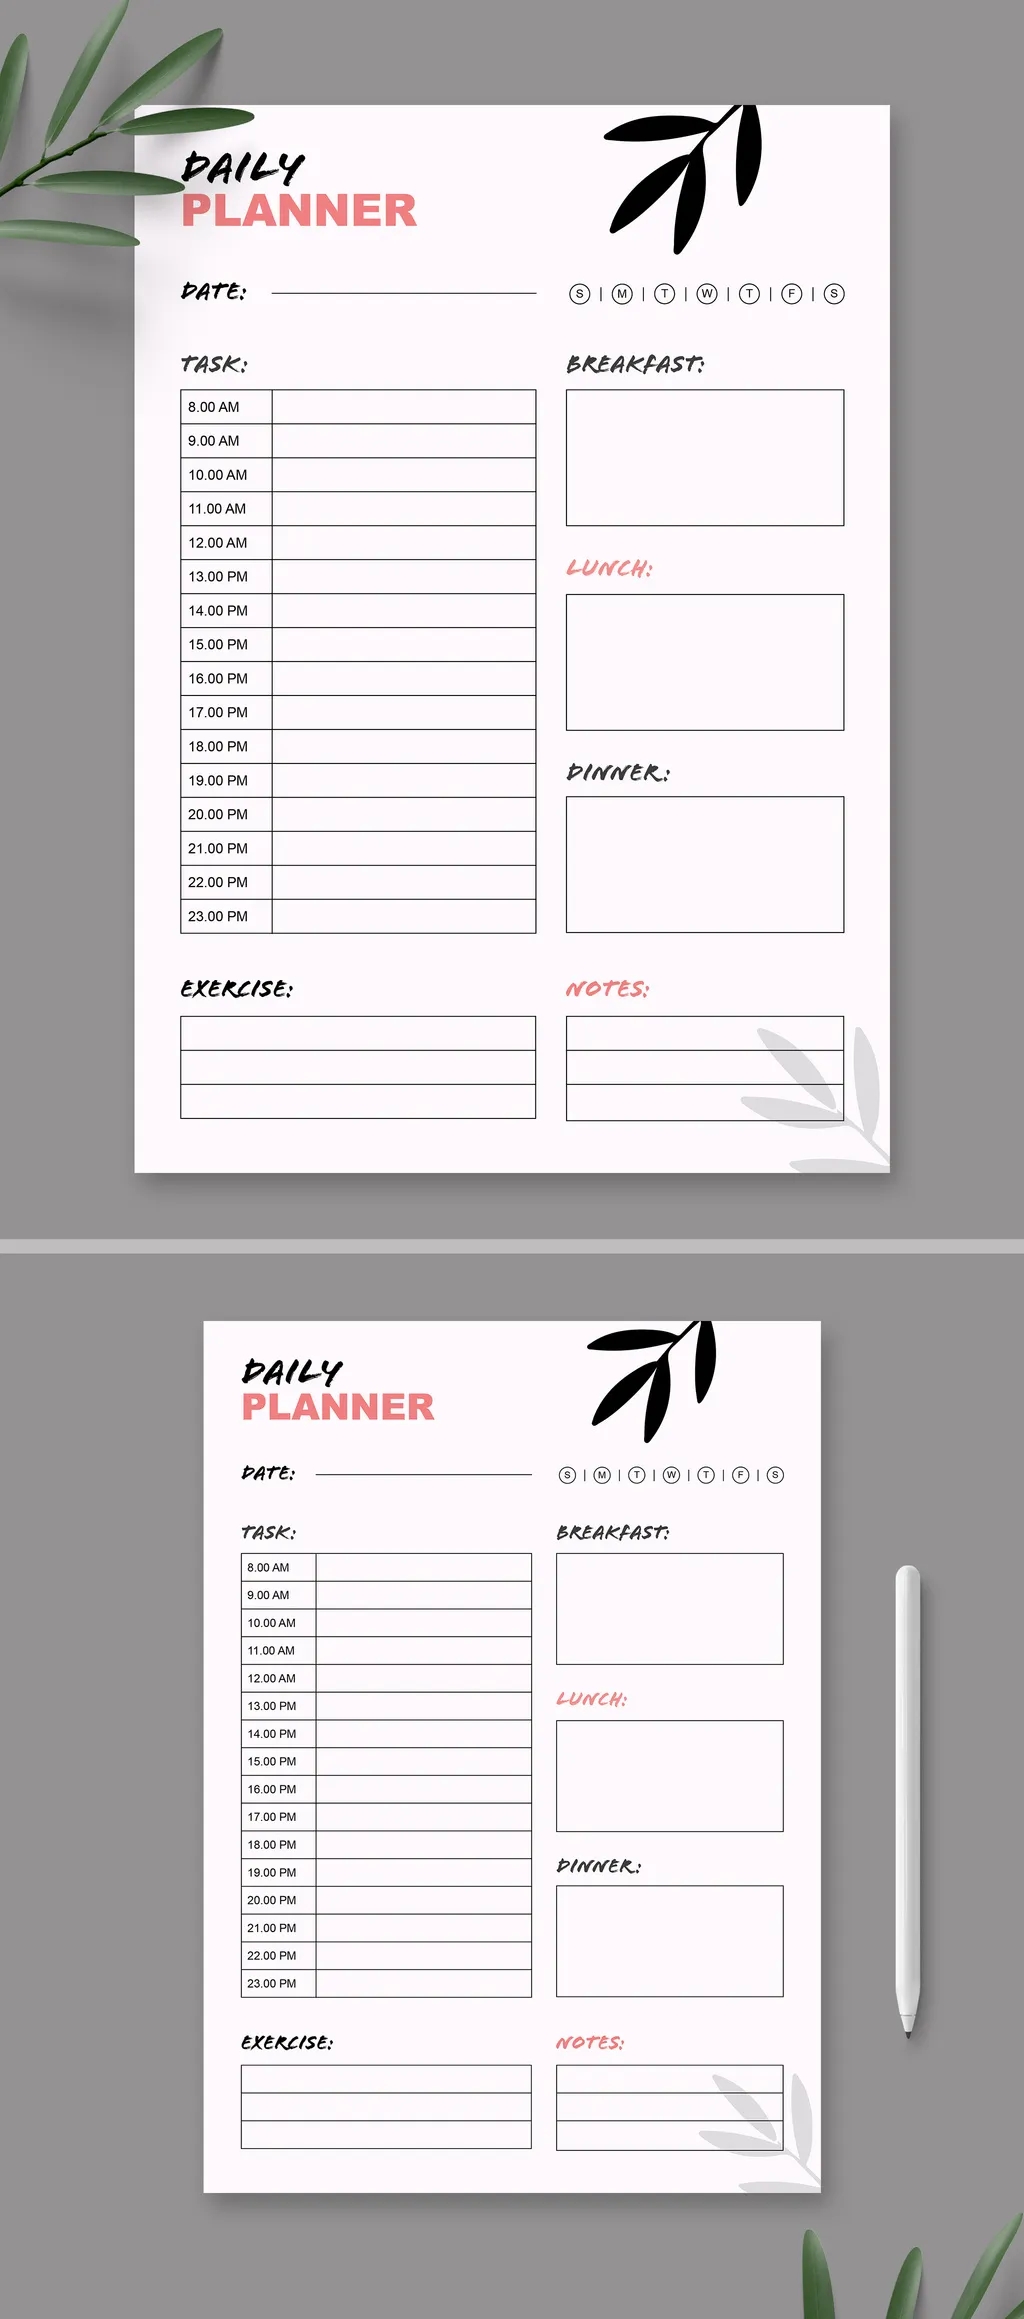 Adobestock - Daily Planner Template Layout 725281527